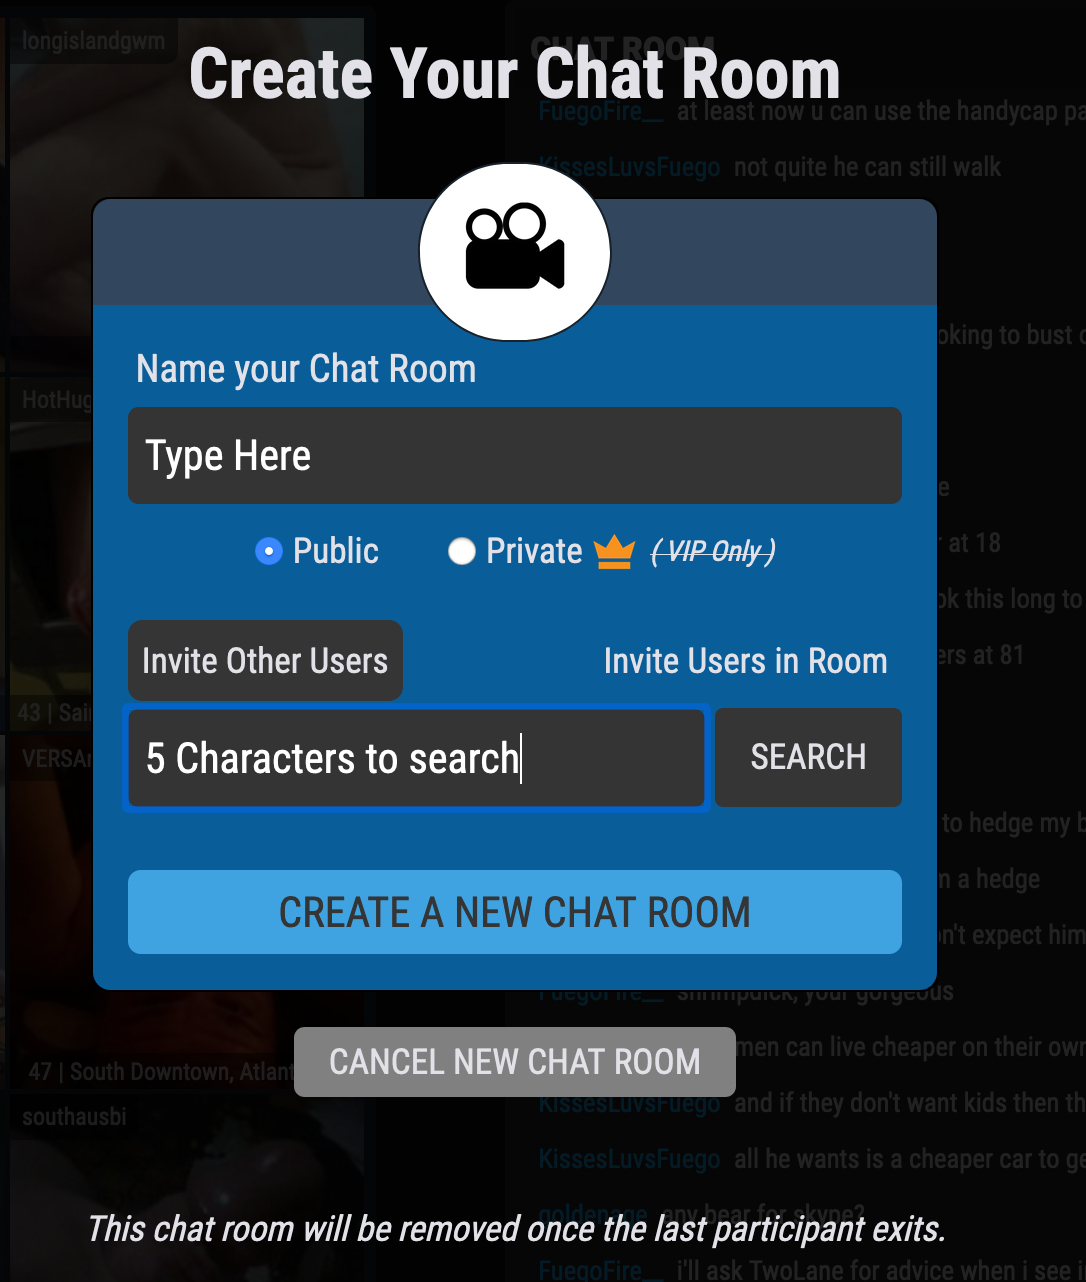 Chat with other persons in private room